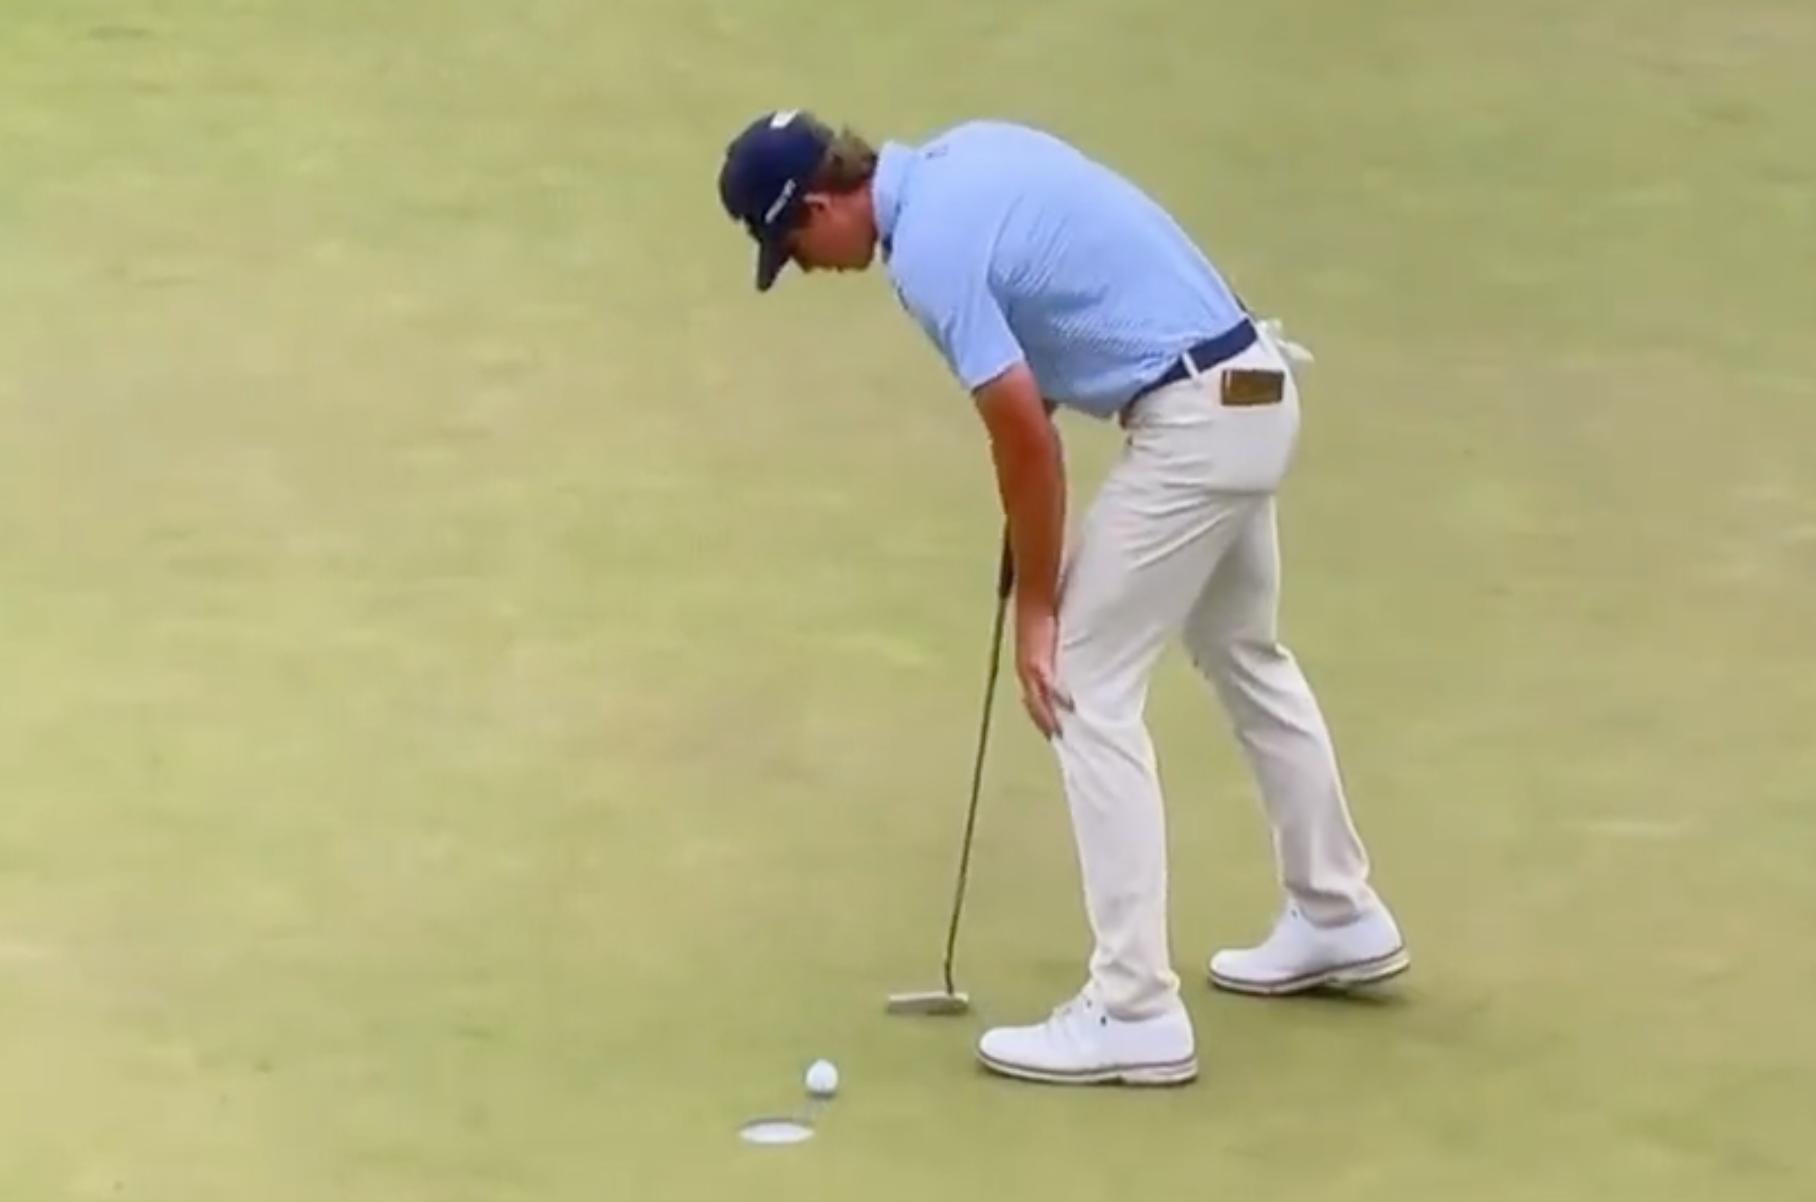 WATCH: Gordon Sargent Putt Jumps Out Of Hole At US Open